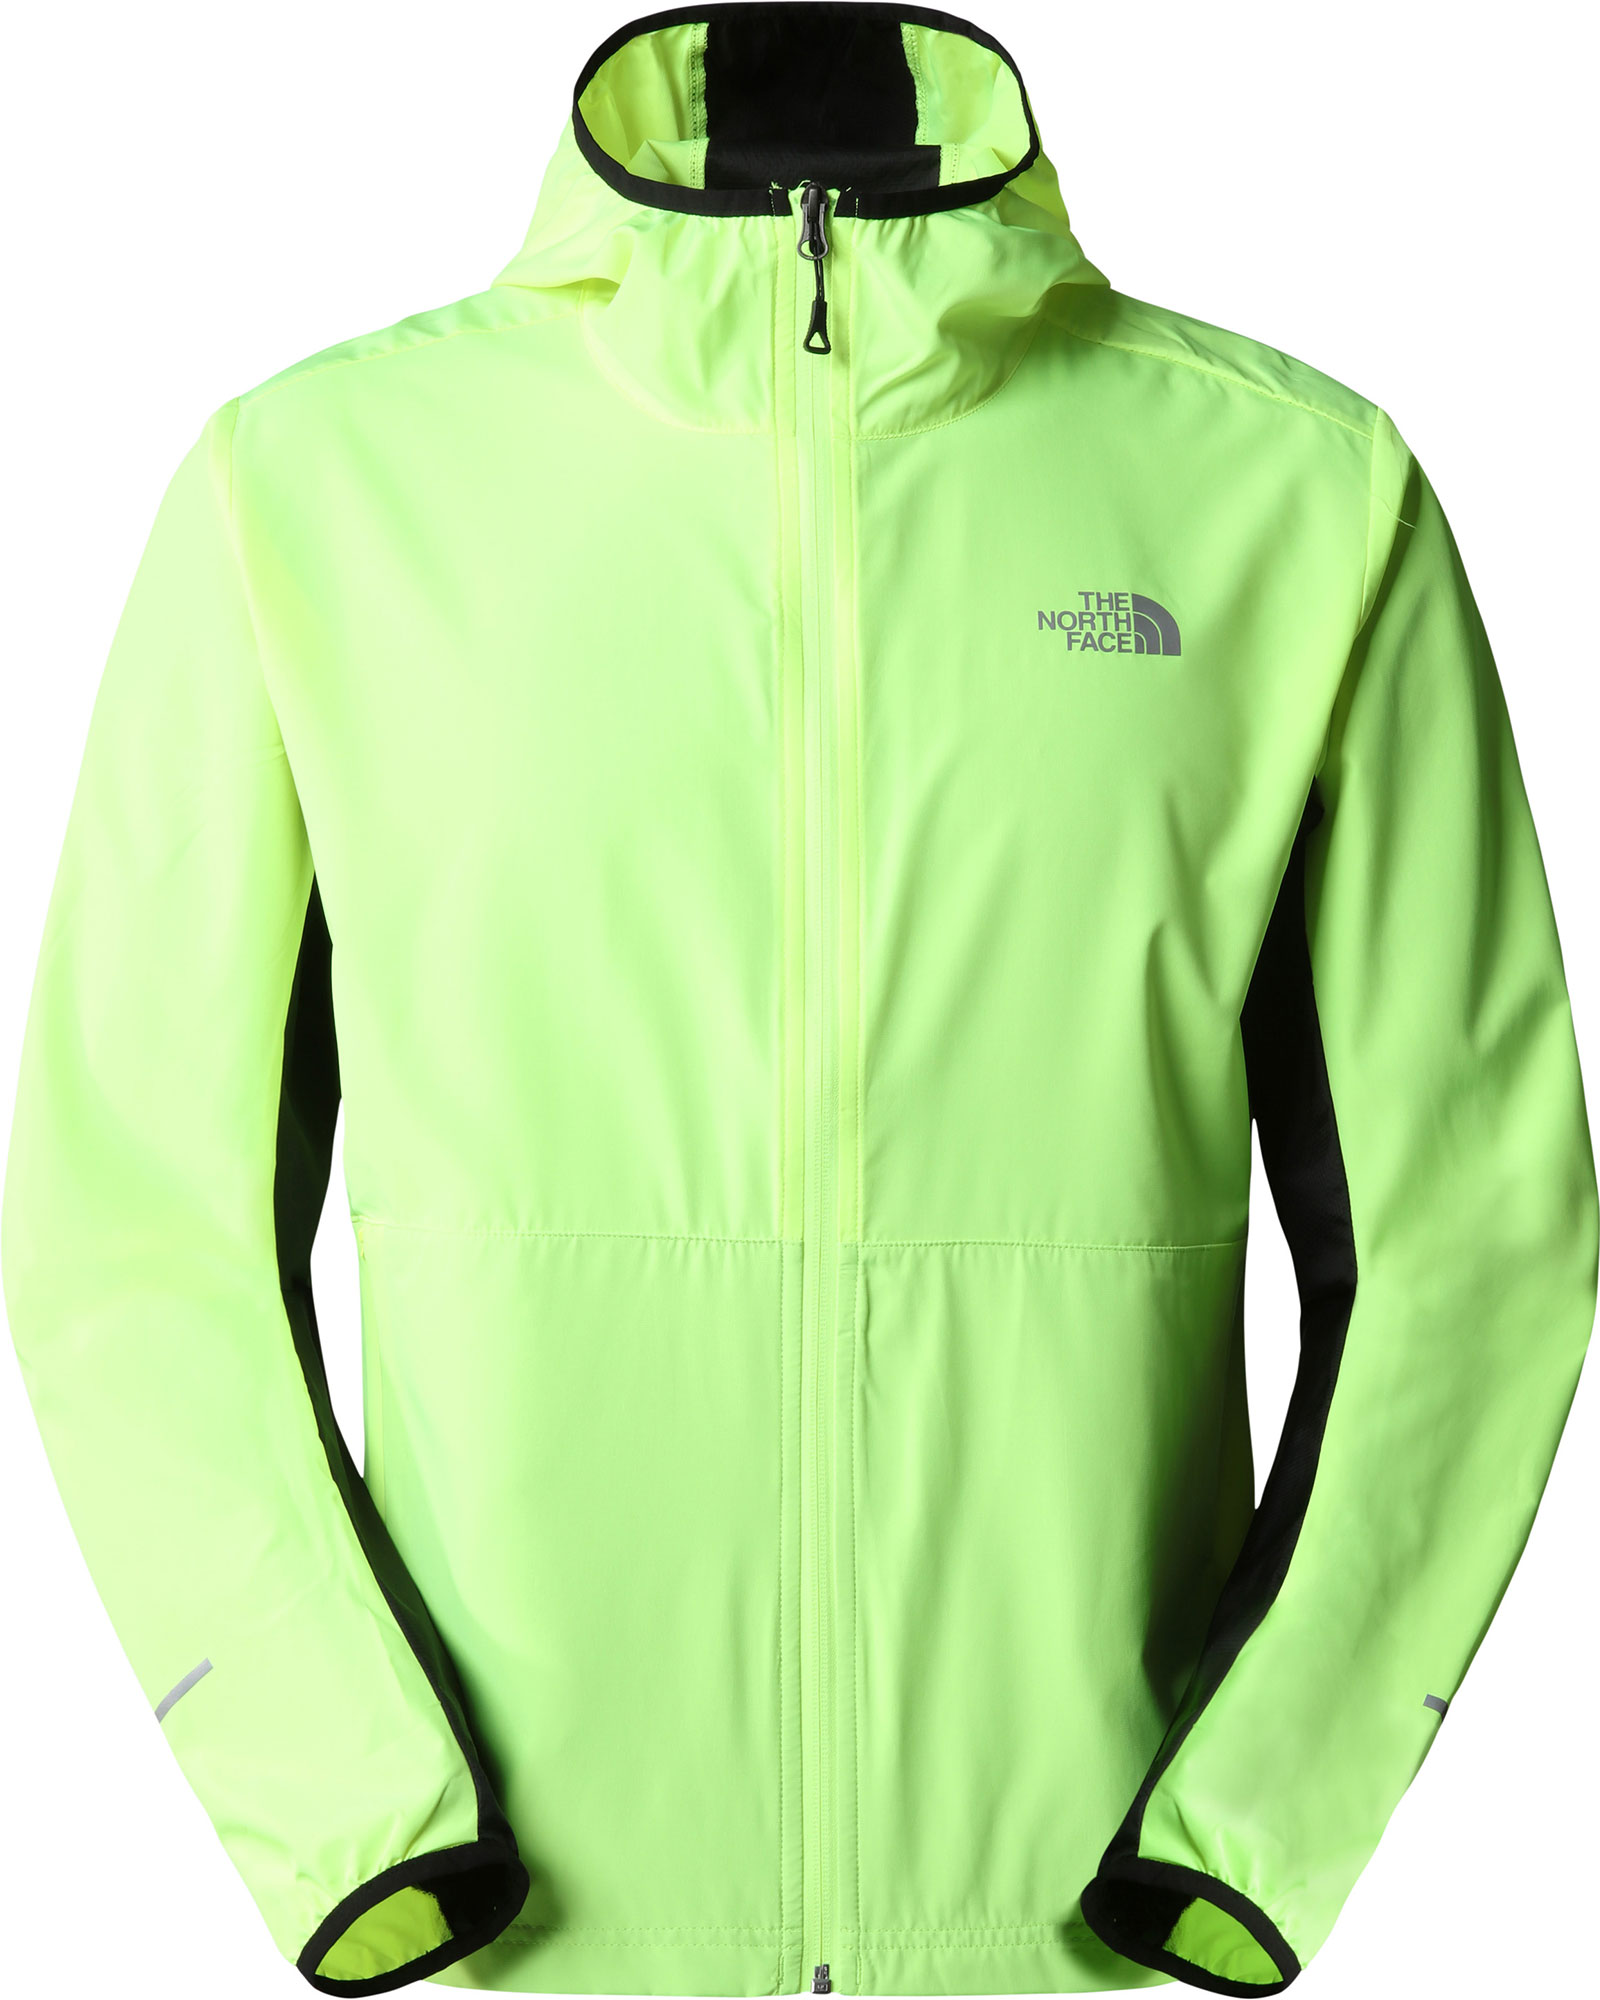 The North Face Men’s Run Wind Jacket - LED Yellow L